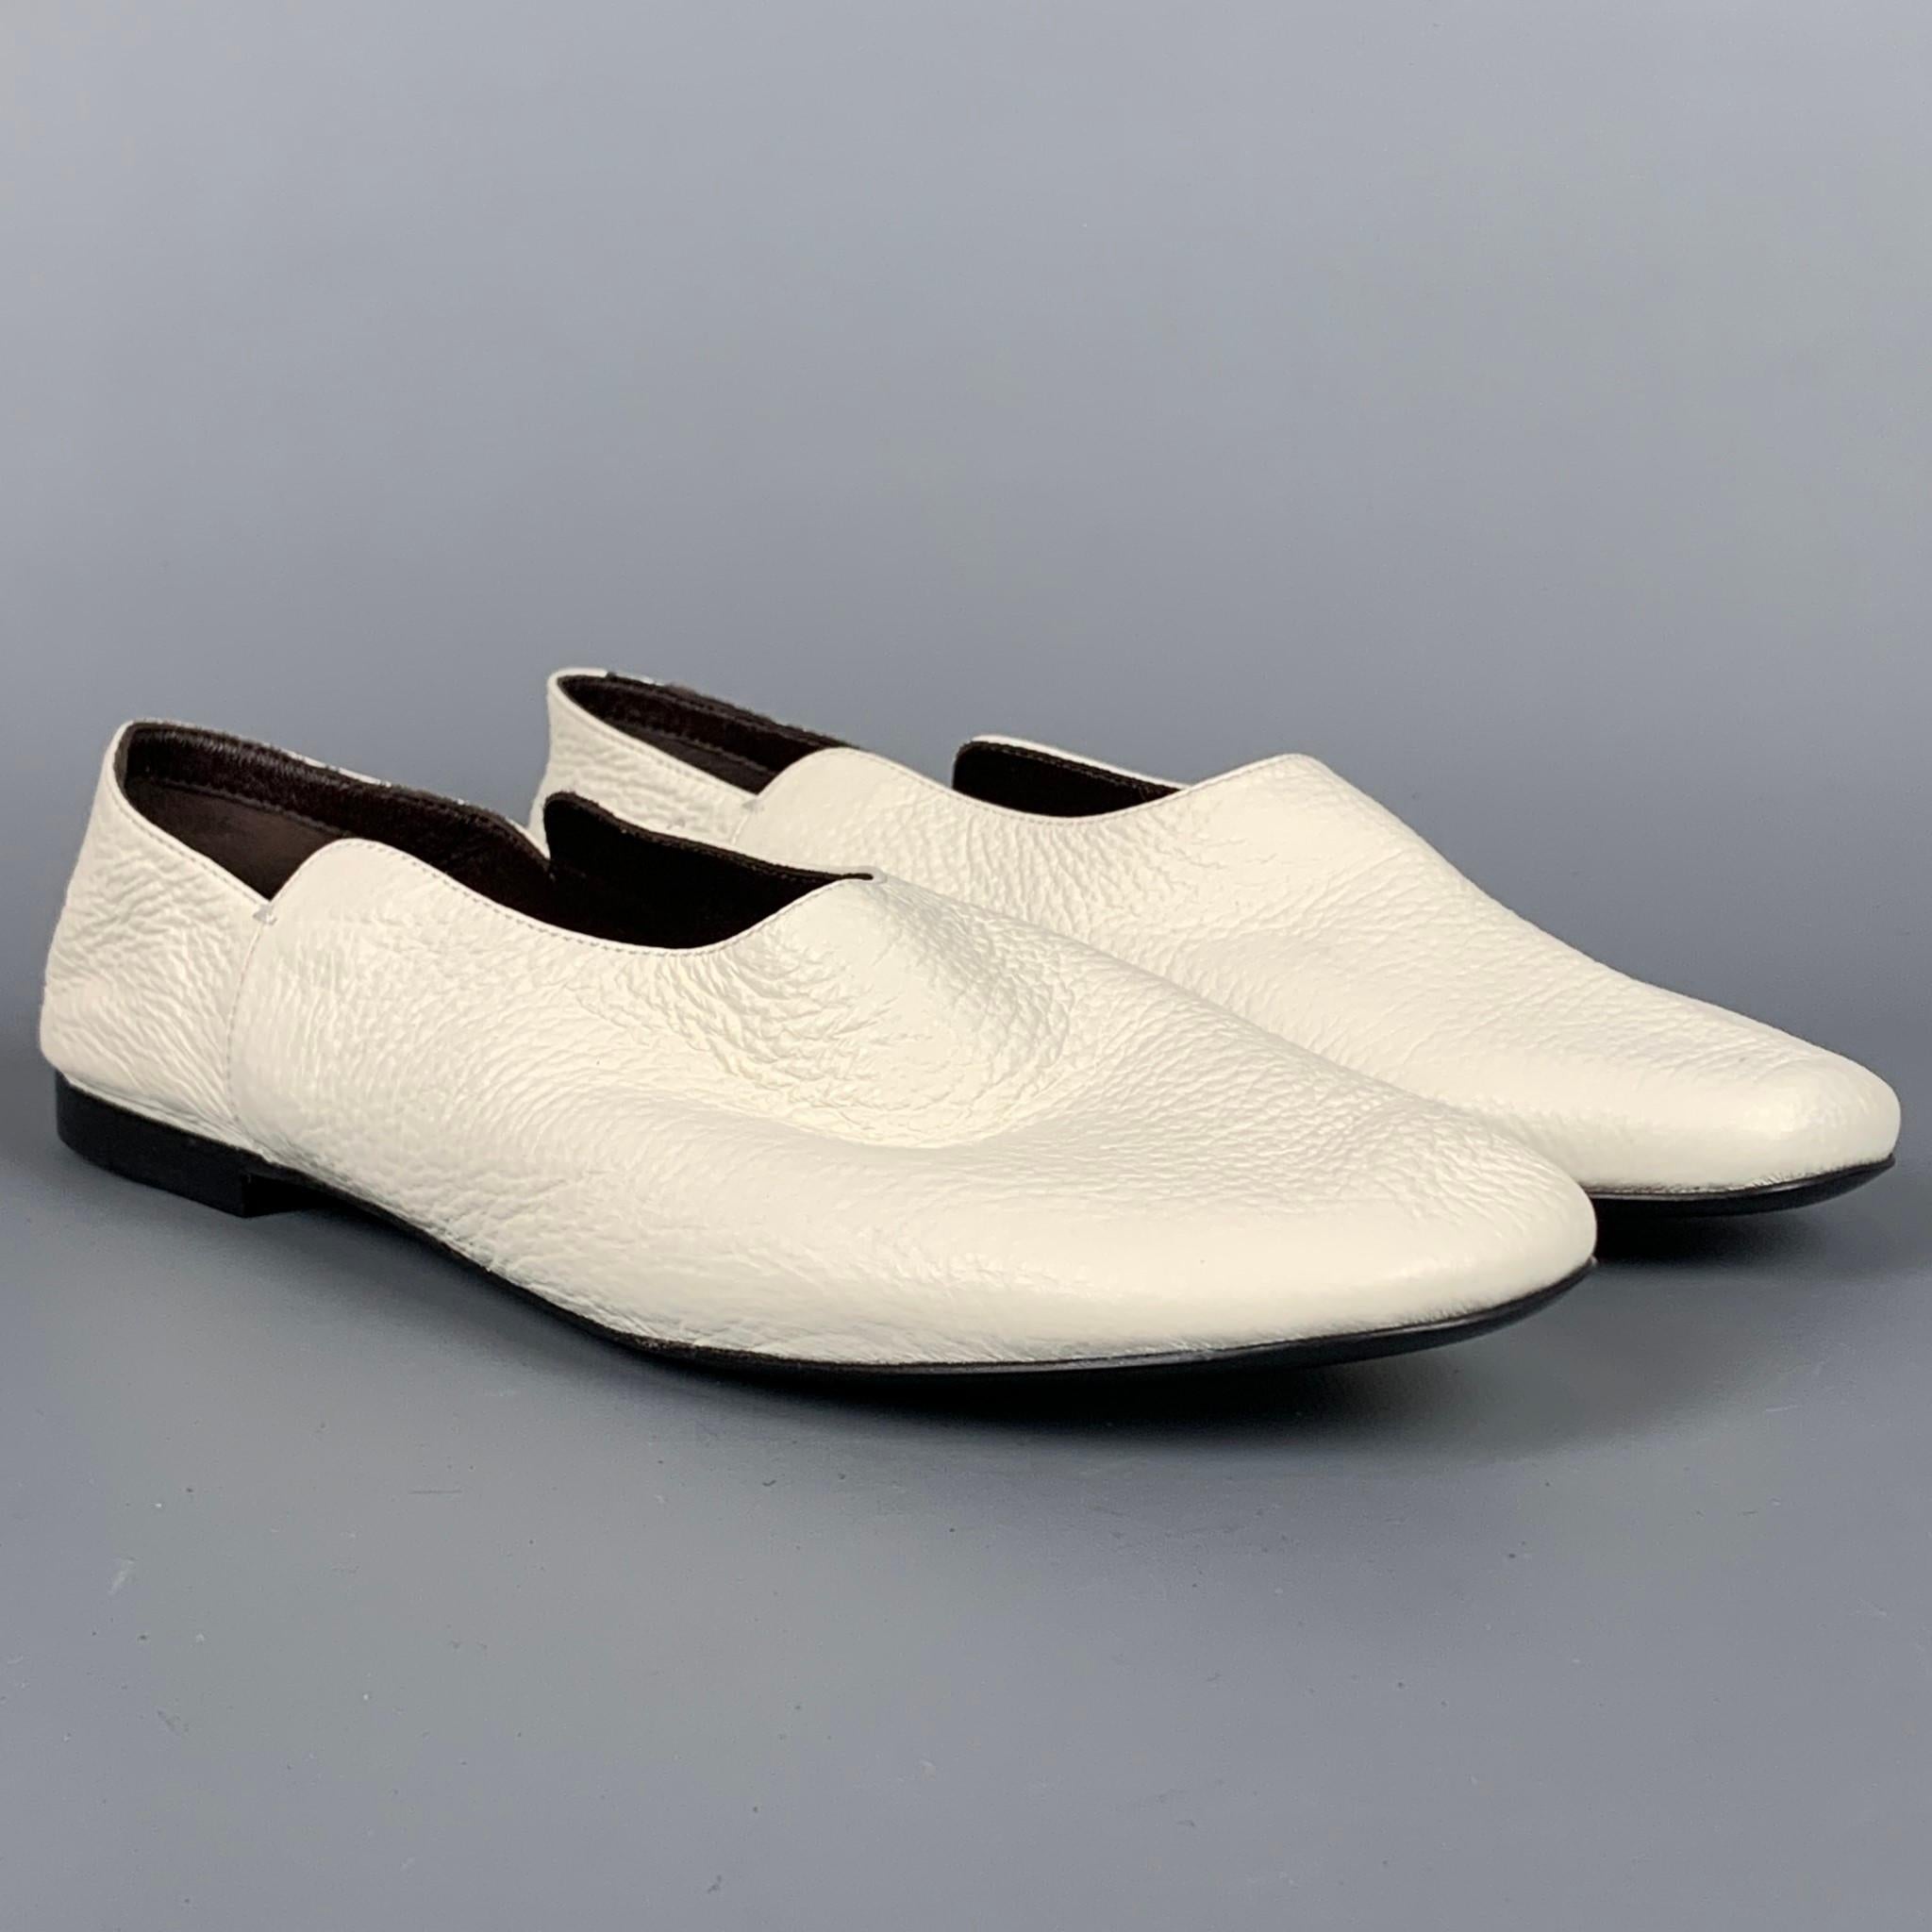 THE ROW flats comes in a white pebble grain leather featuring a collapsible back, slip on, and a wooden sol. Made in Italy.

Very Good Pre-Owned Condition.
Marked: IT 38.5
Original Retail Price: $690.00

Outsole: 10 in. x 3 in. 